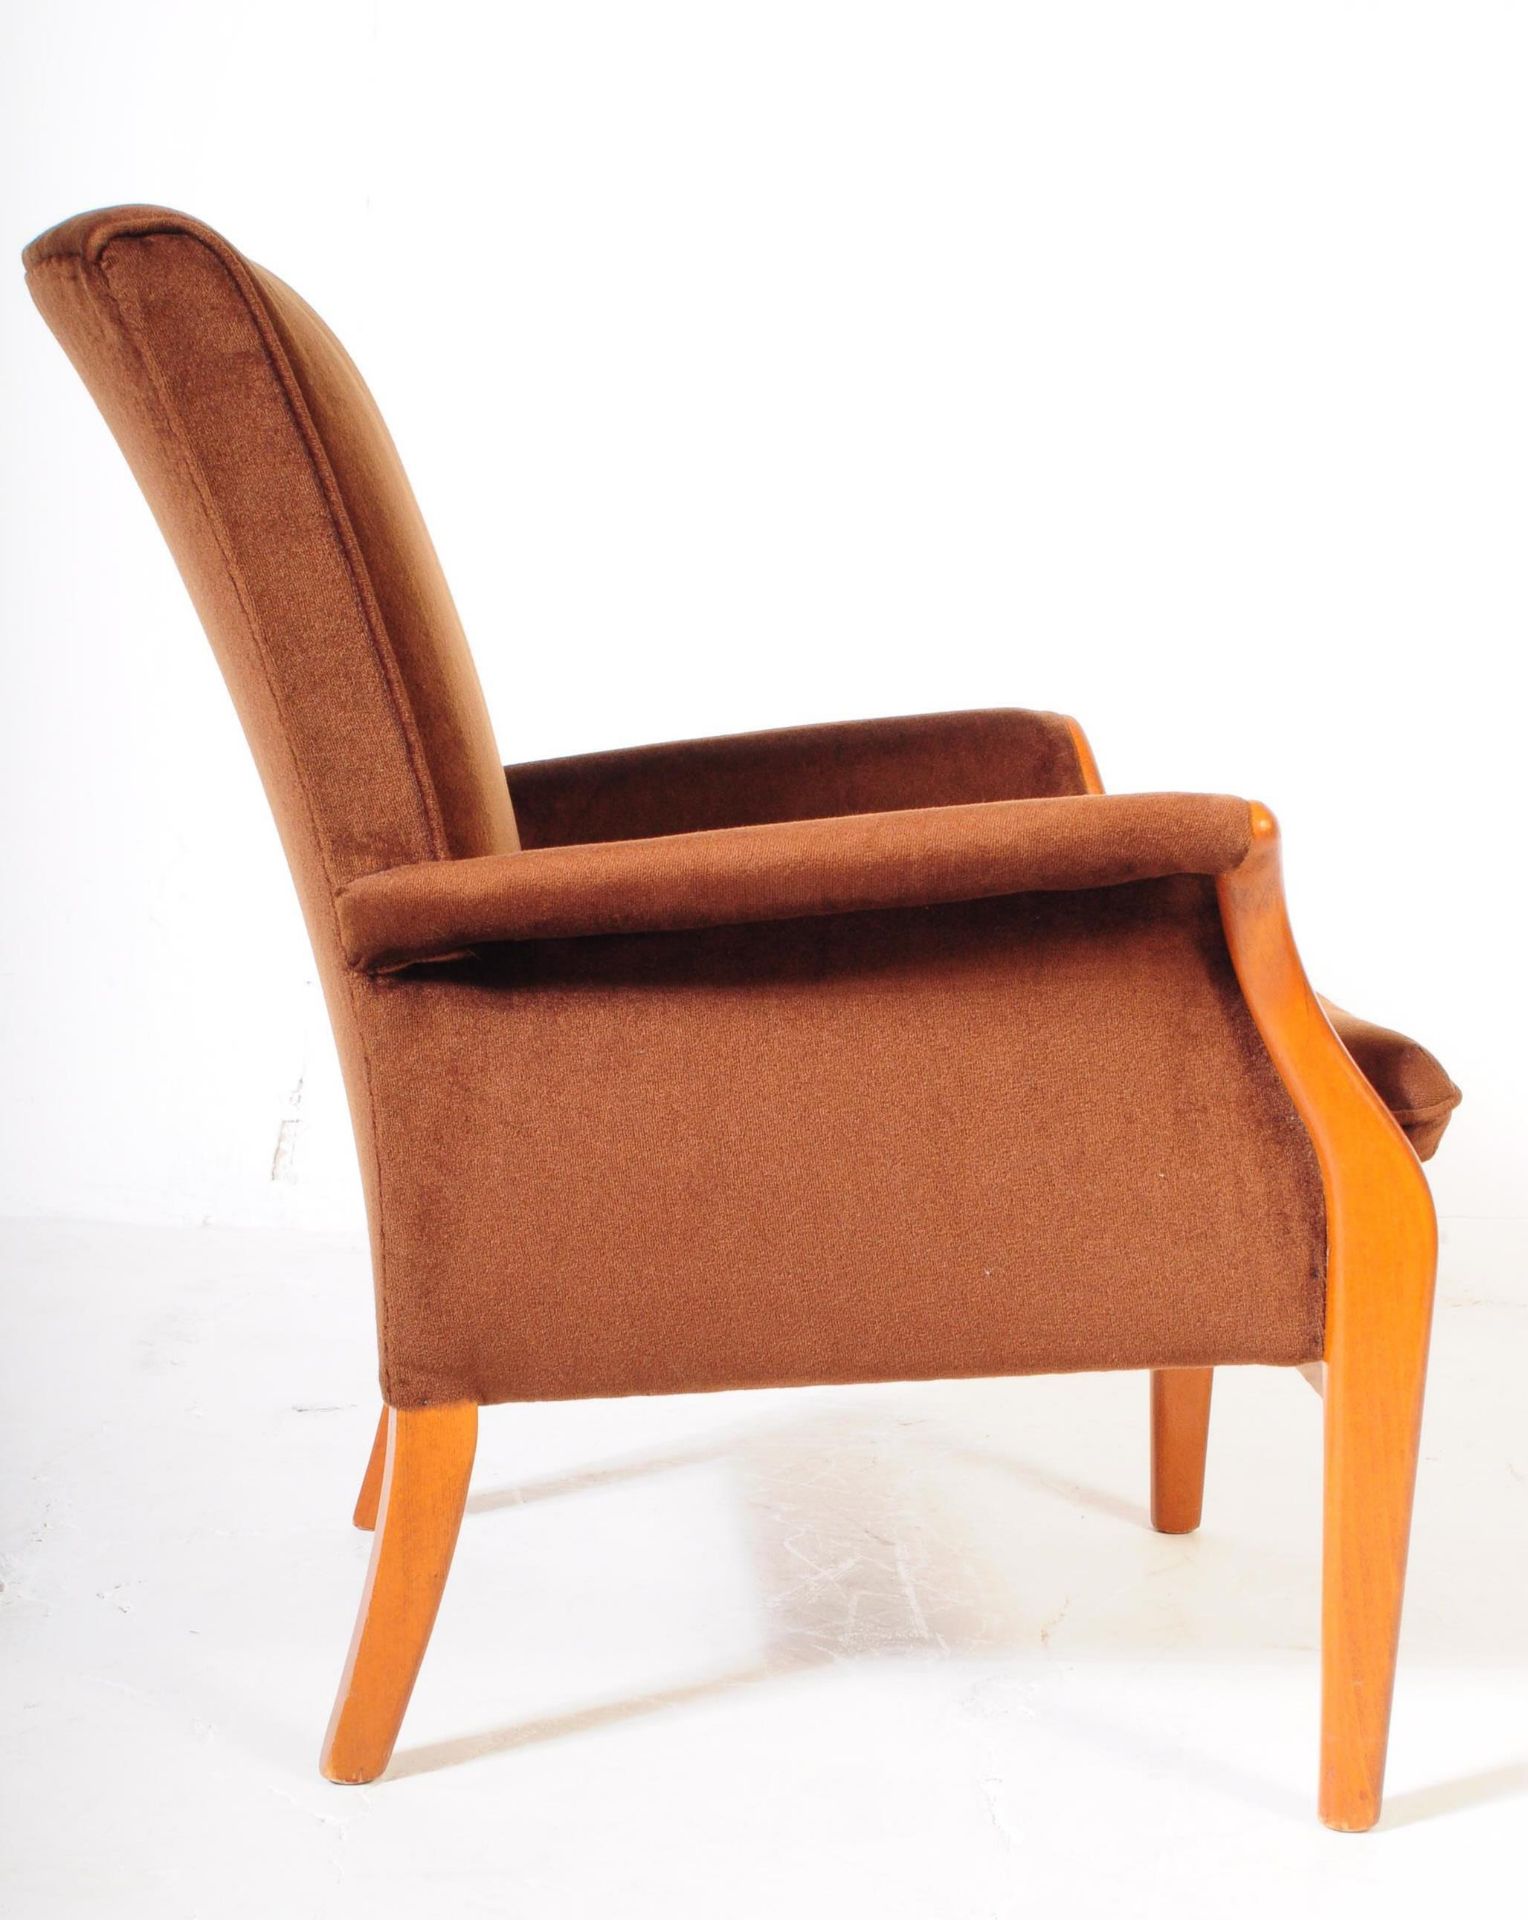 PARKER KNOLL - PAIR OF MID CENTURY ARMCHAIRS - Image 6 of 6